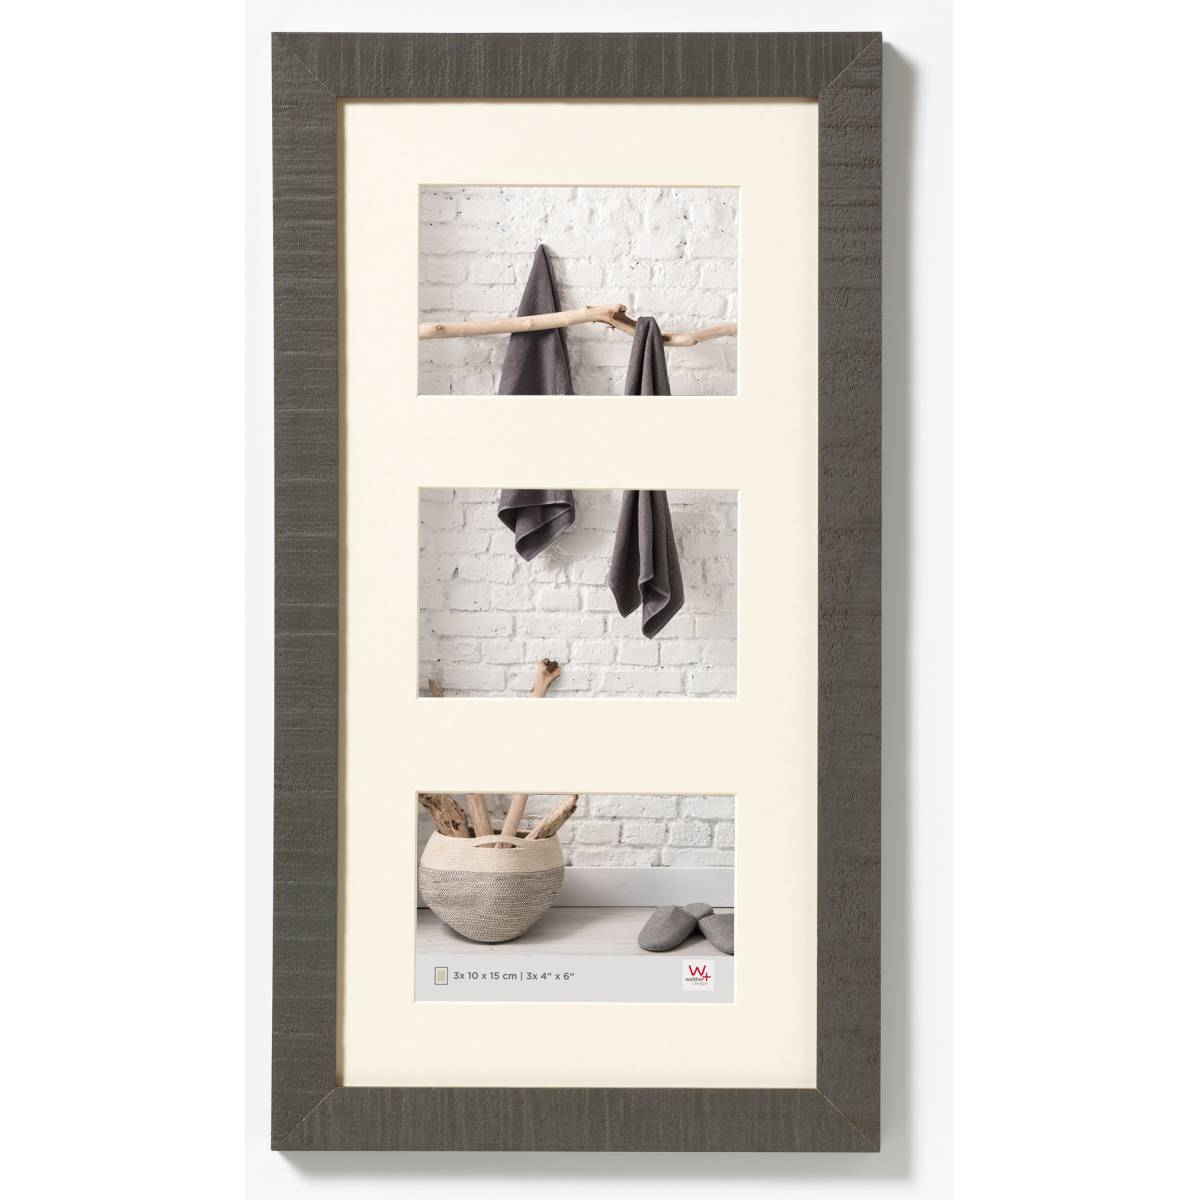 Walther Home Wooden Picture Frame - 23x11 inch - (Insert for 3x 8x6 inch) Grey